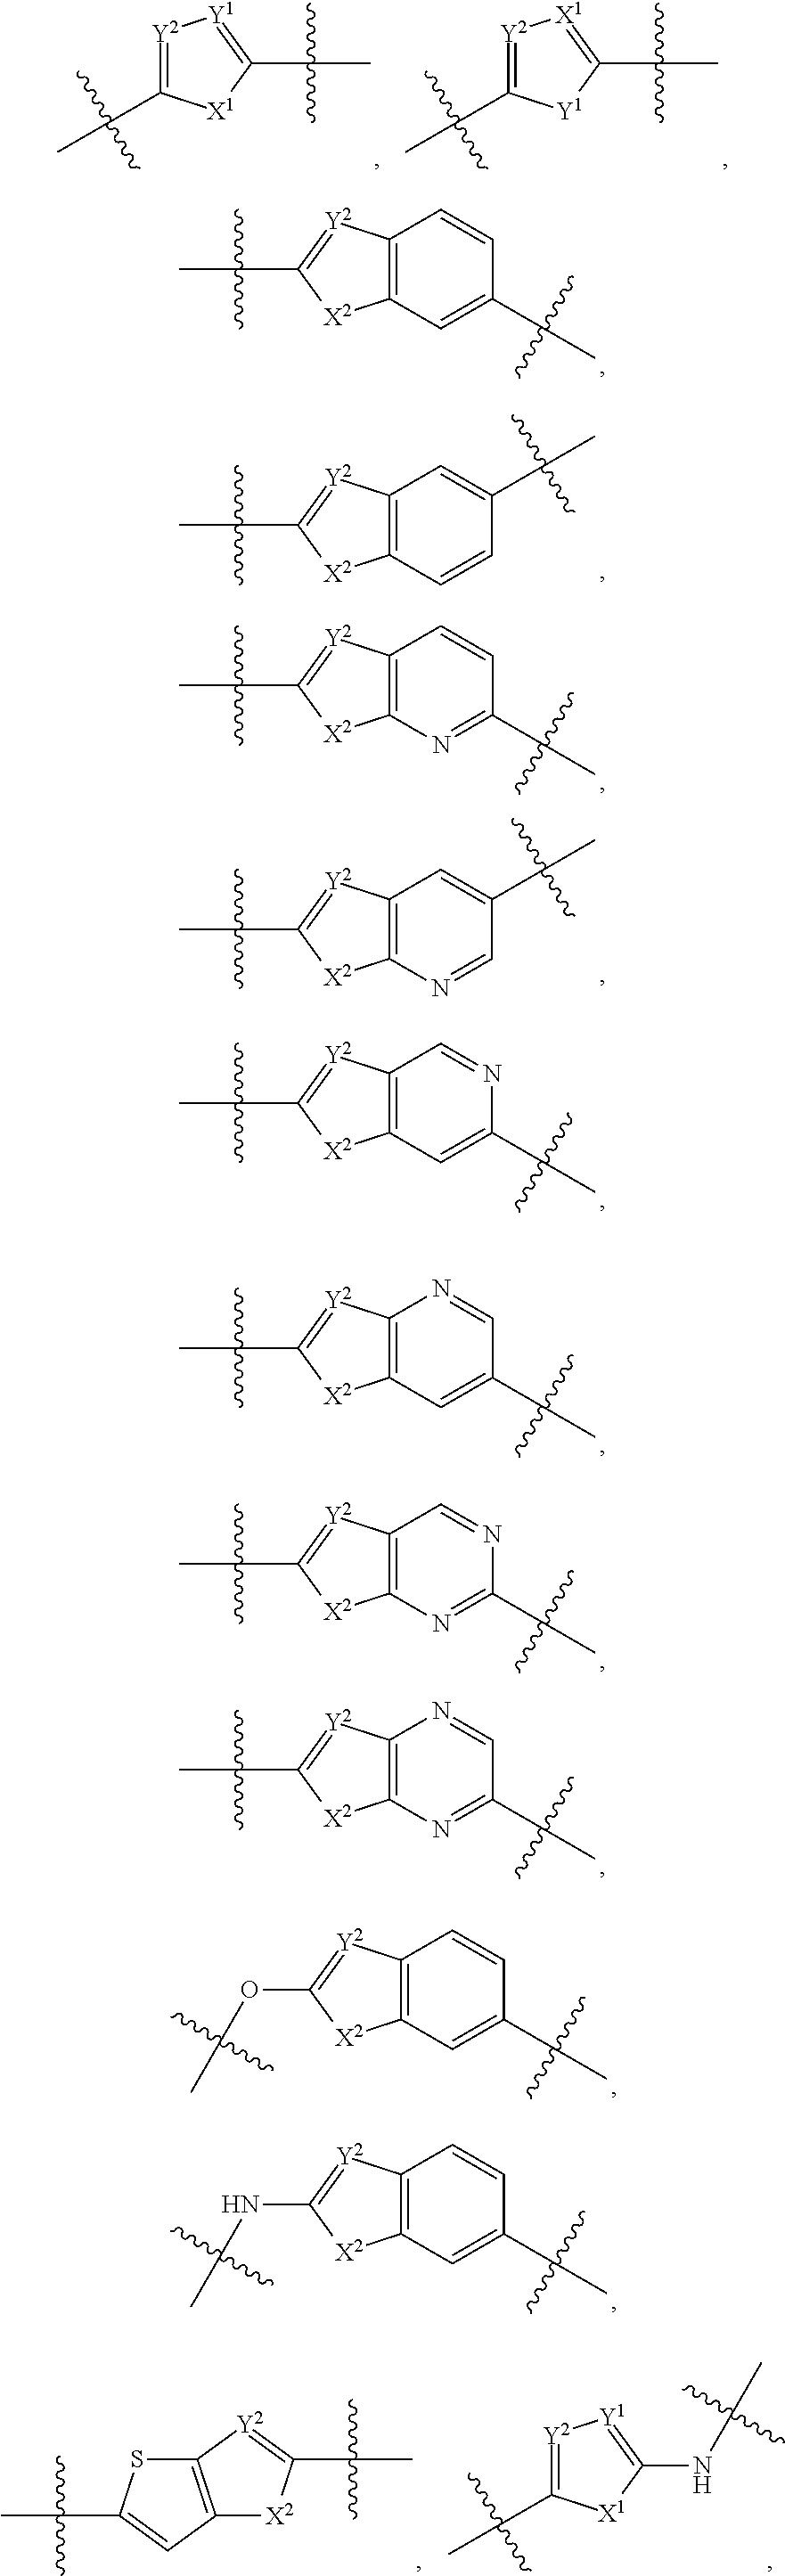 Bridged ring compounds as hepatitis C virus (HCV) inhibitors and pharmaceutical applications thereof